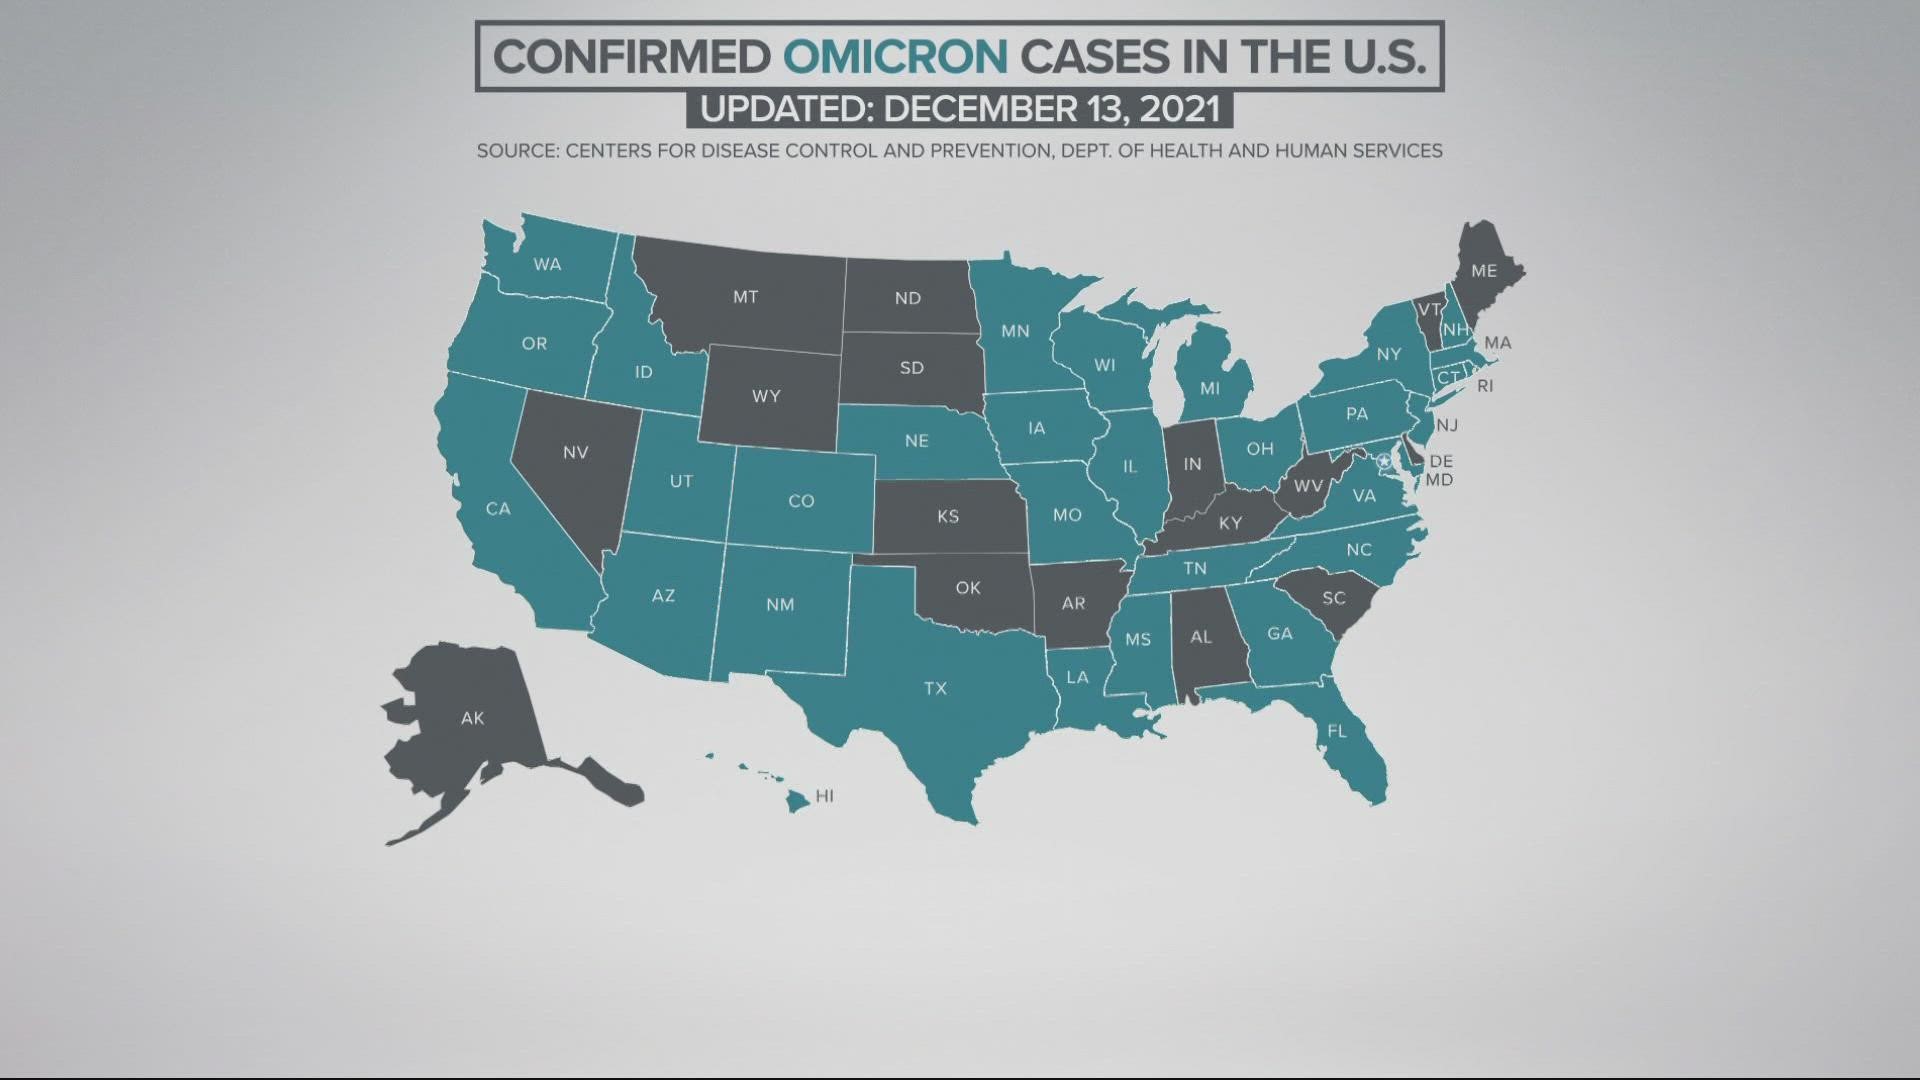 Health experts said it would only be a matter of time before omicron reached Oregon. OHA confirmed three cases on Dec. 13.